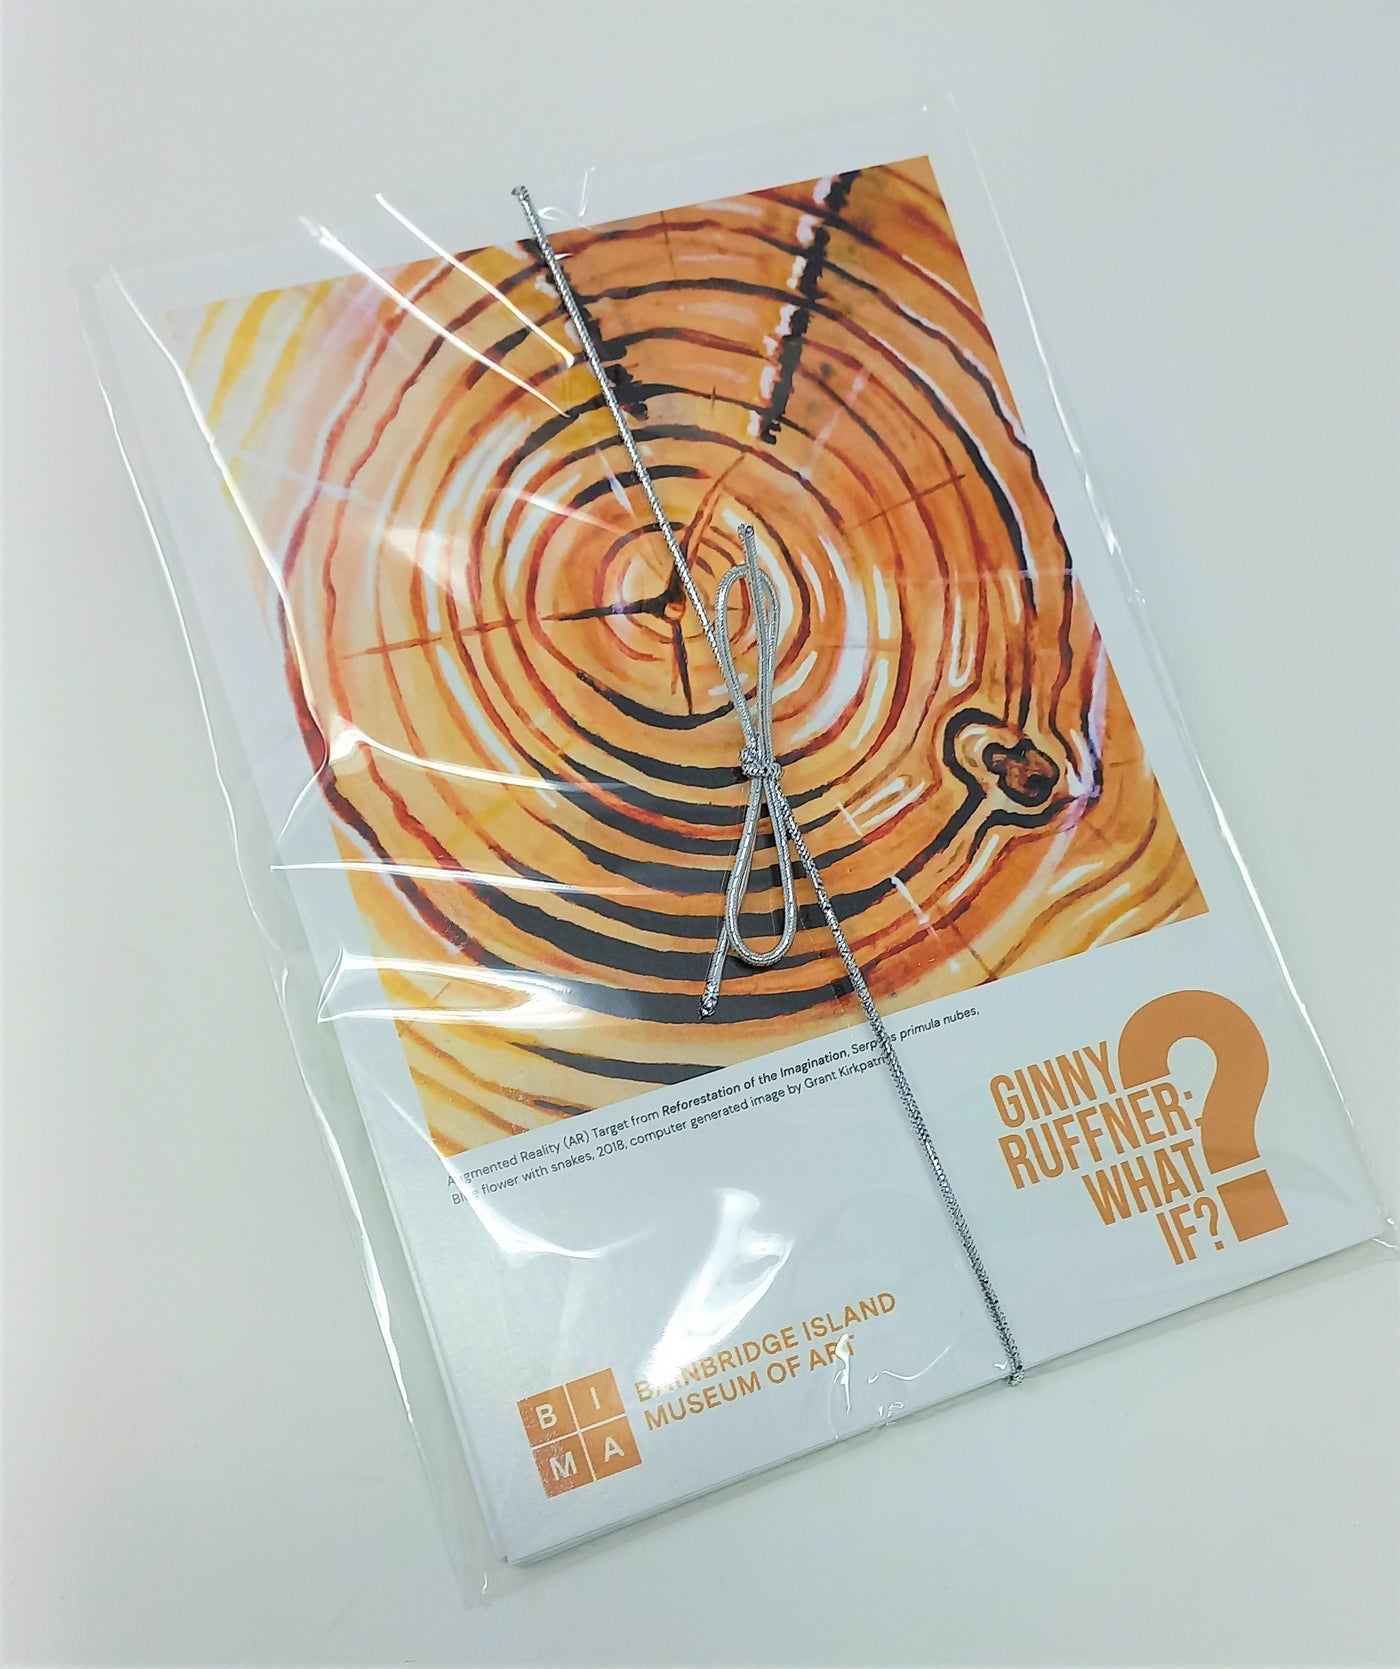 Ginny Ruffner: What If? Exhibition Postcards Set